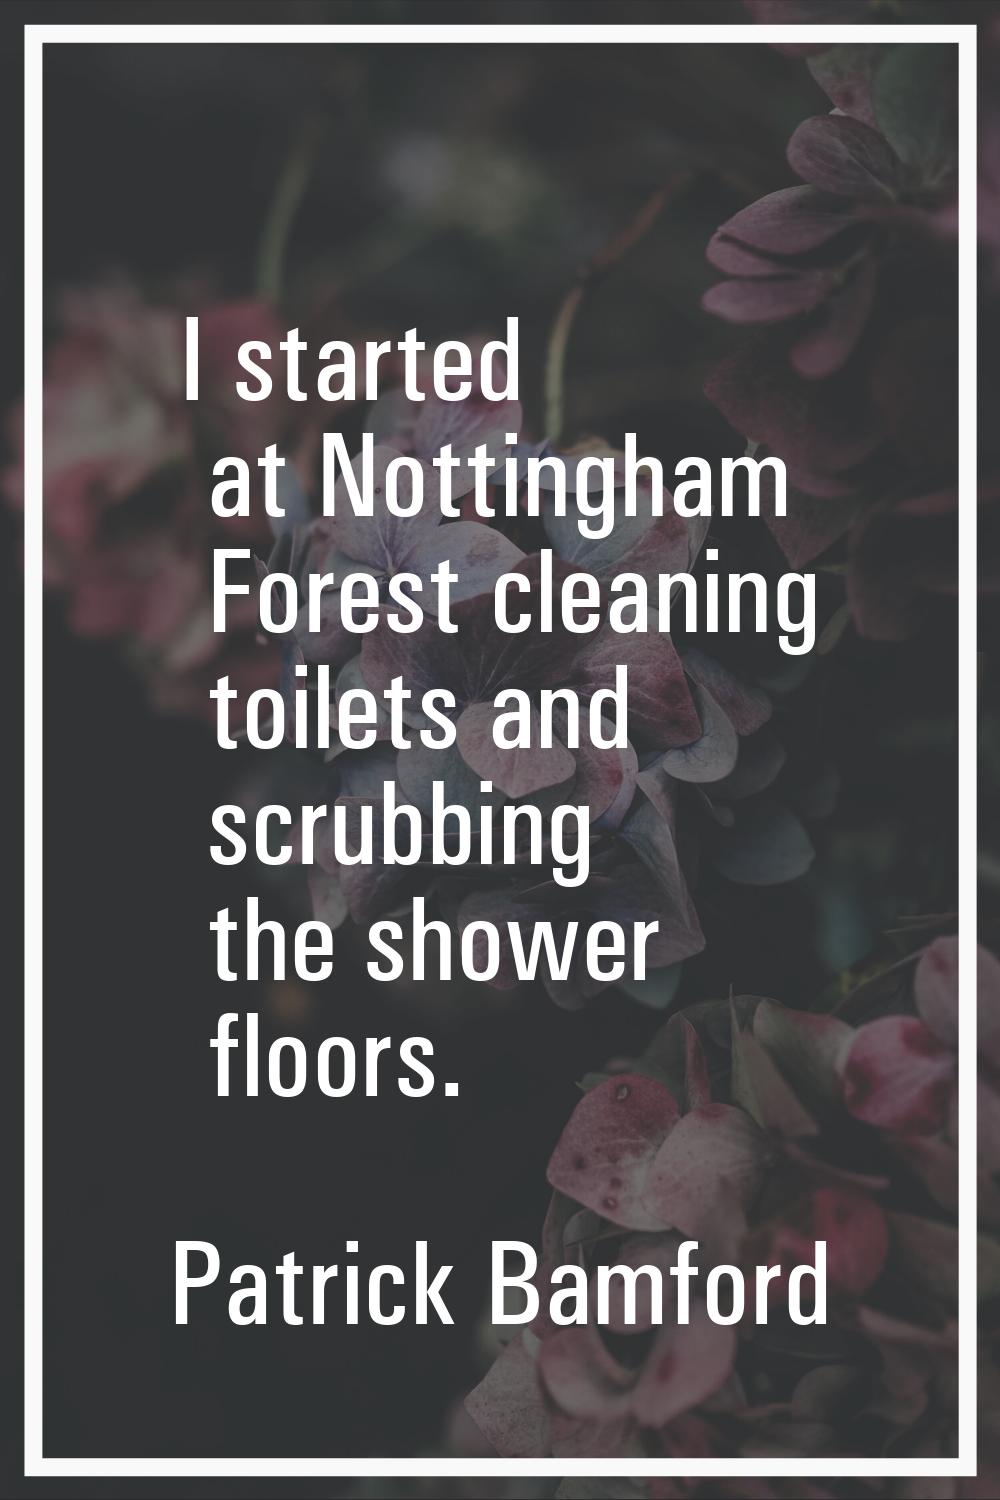 I started at Nottingham Forest cleaning toilets and scrubbing the shower floors.